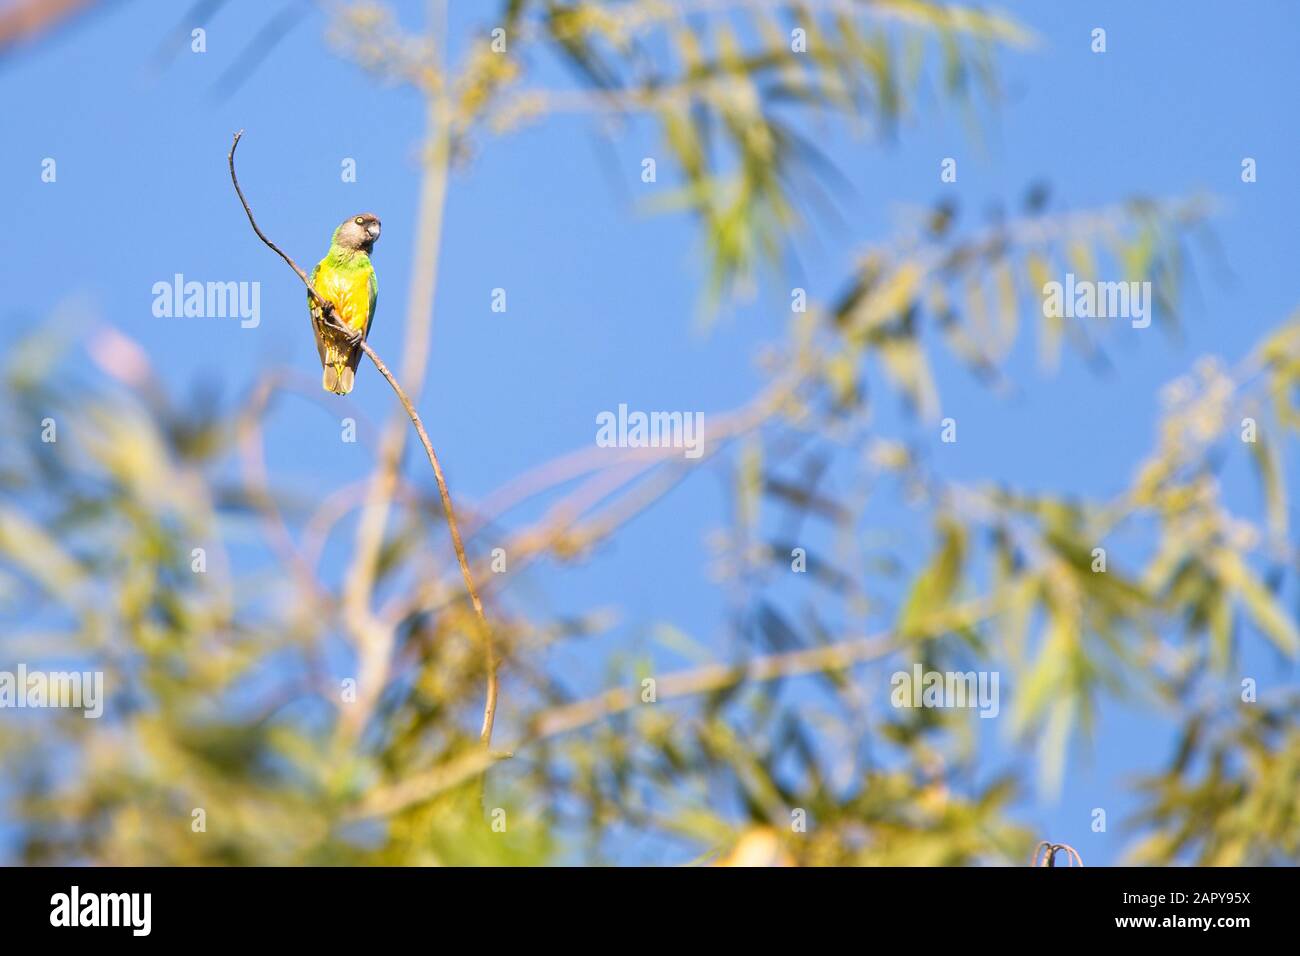 Senegal Parrot (Poicephalus senegalus) perched high in a tree, Gambia. Stock Photo